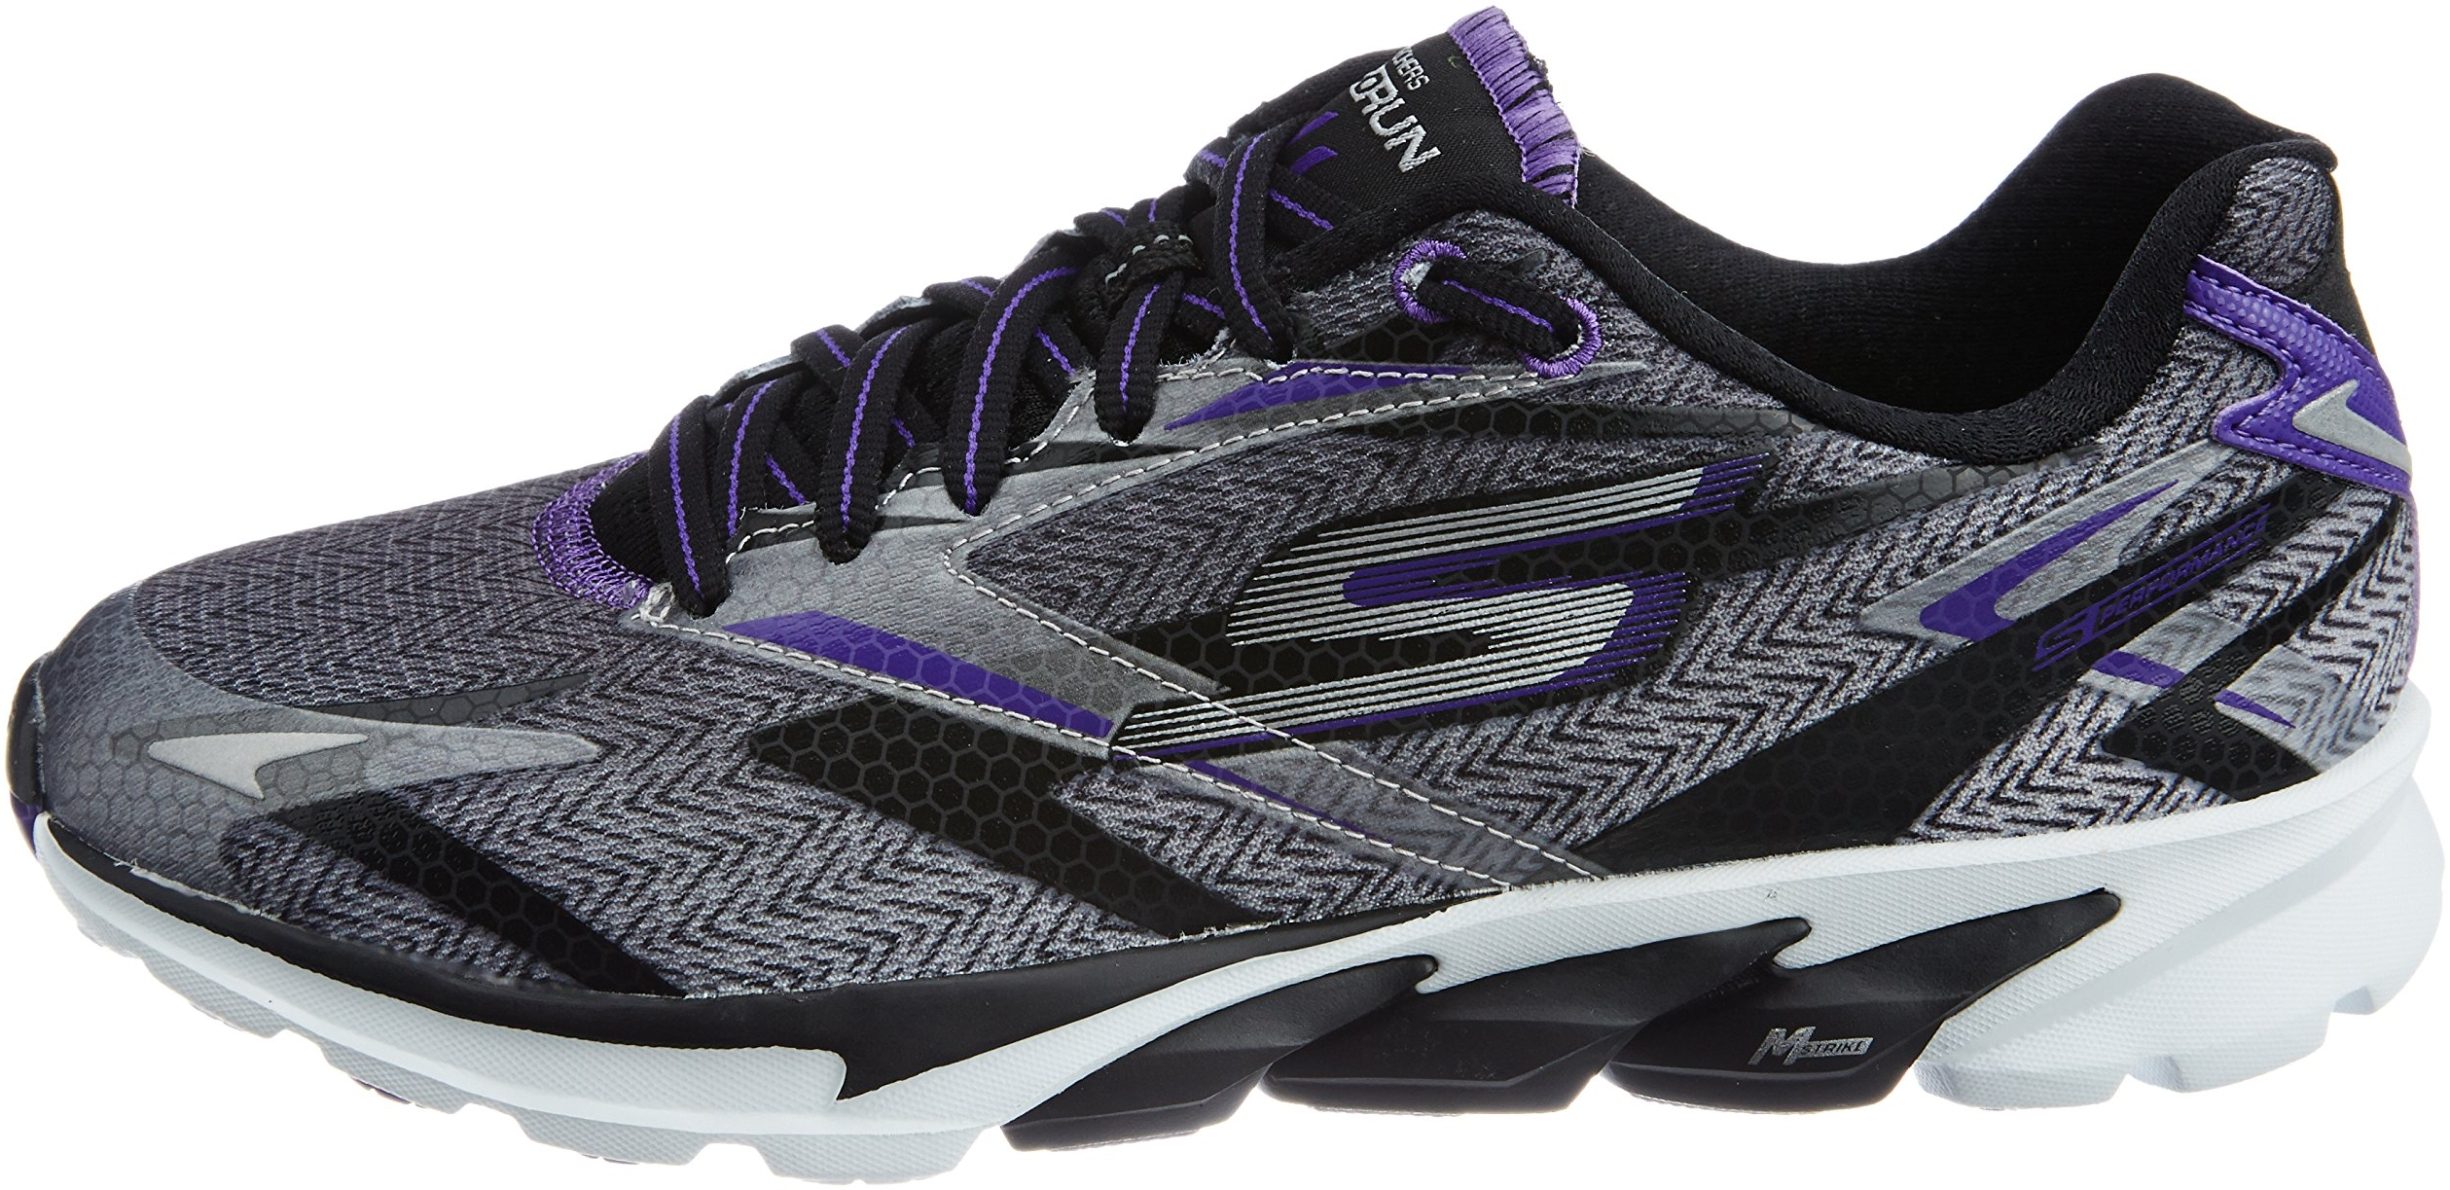 Only $40 + Review of Skechers GOrun 4 